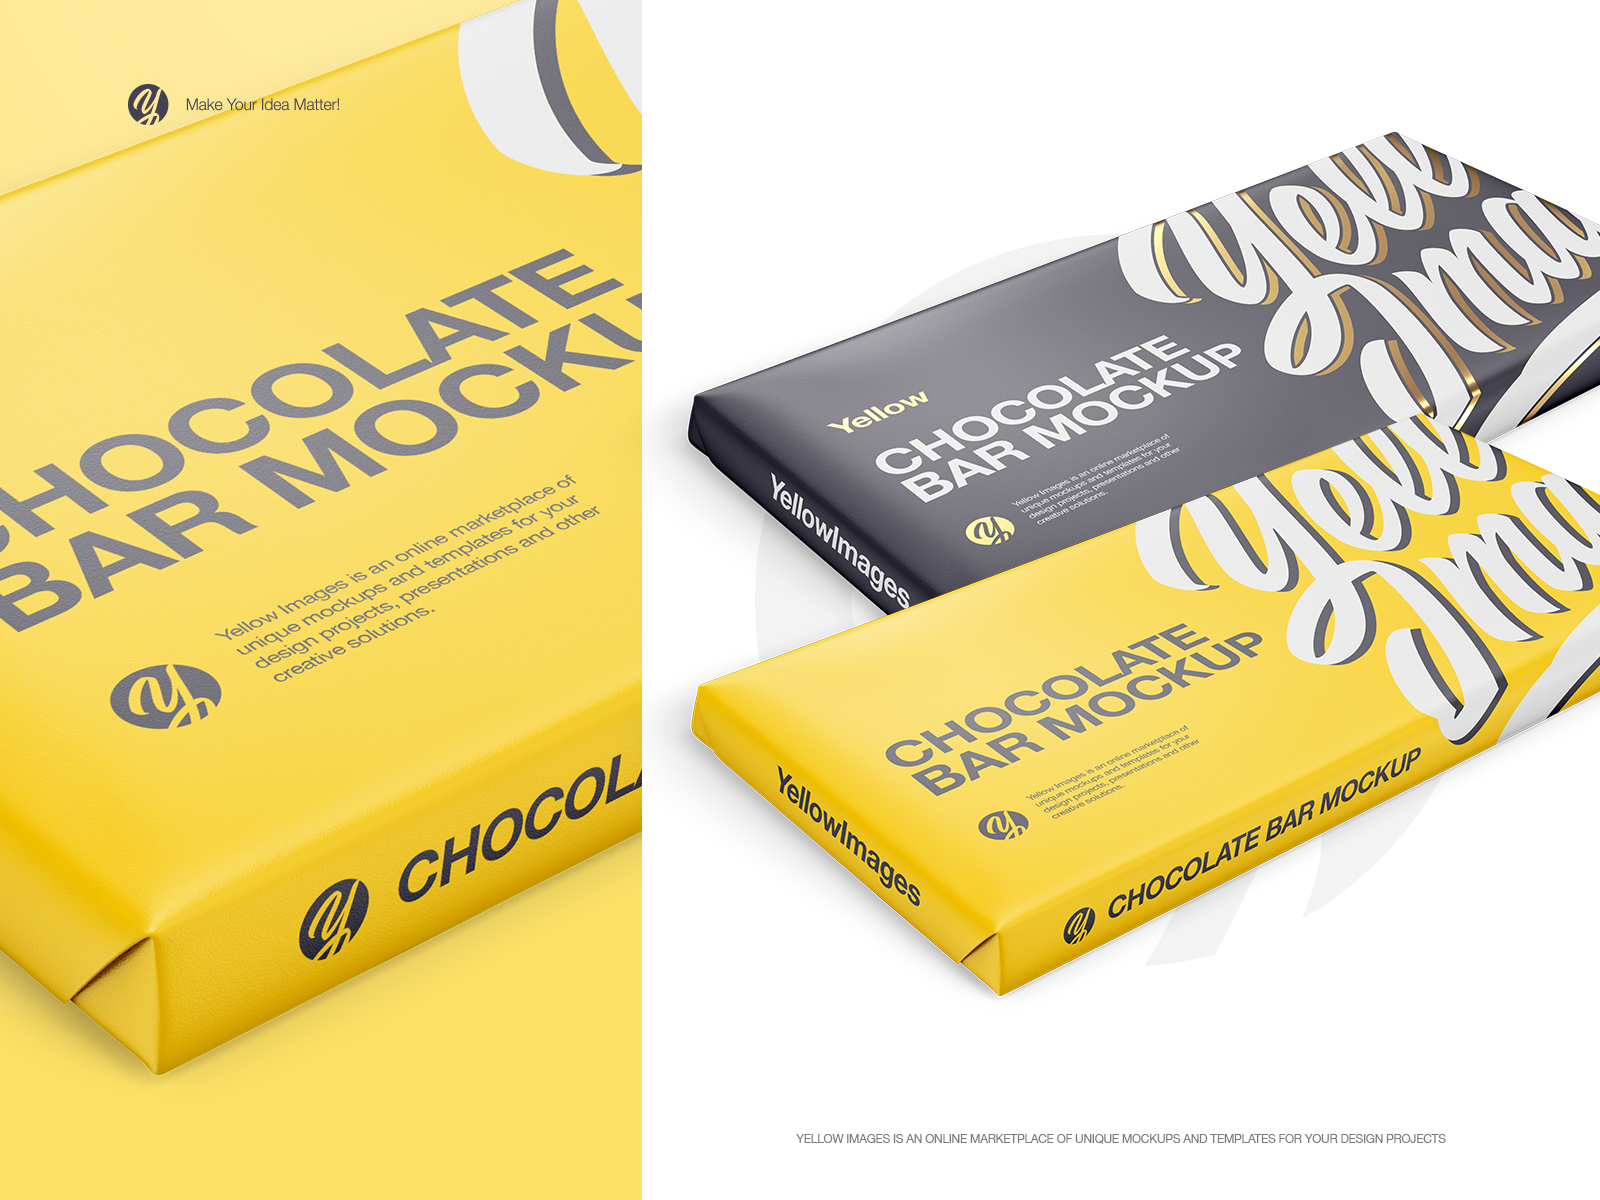 Download Paper Chocolate Bar Mockup By Helenstock On Dribbble PSD Mockup Templates